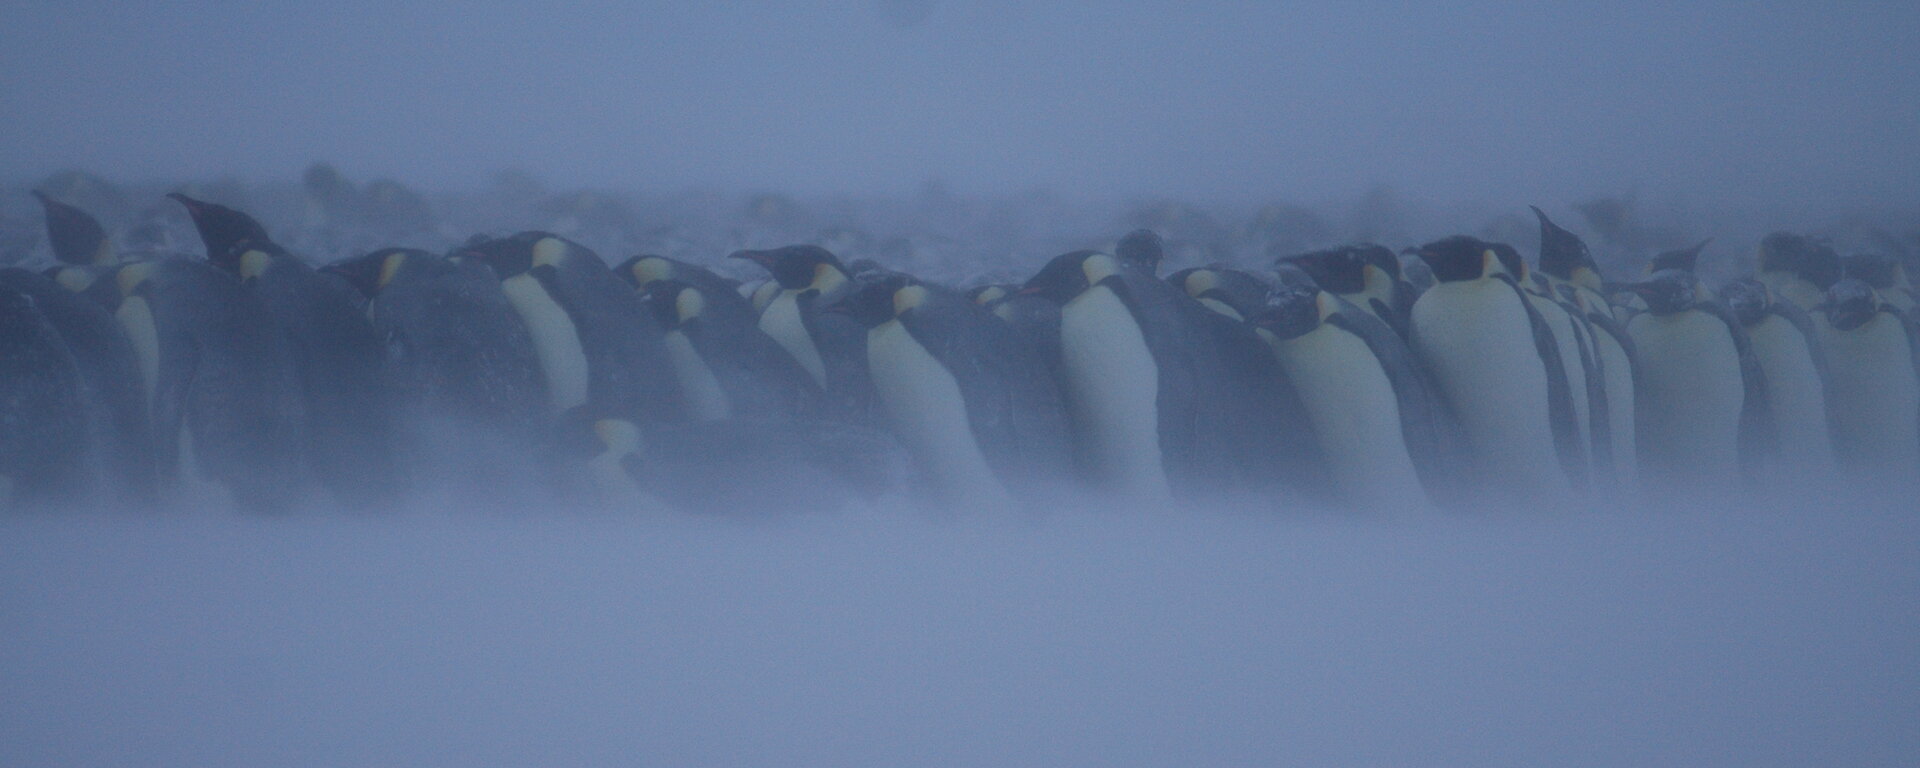 Emperor penguins in a huddle during a blizzard.